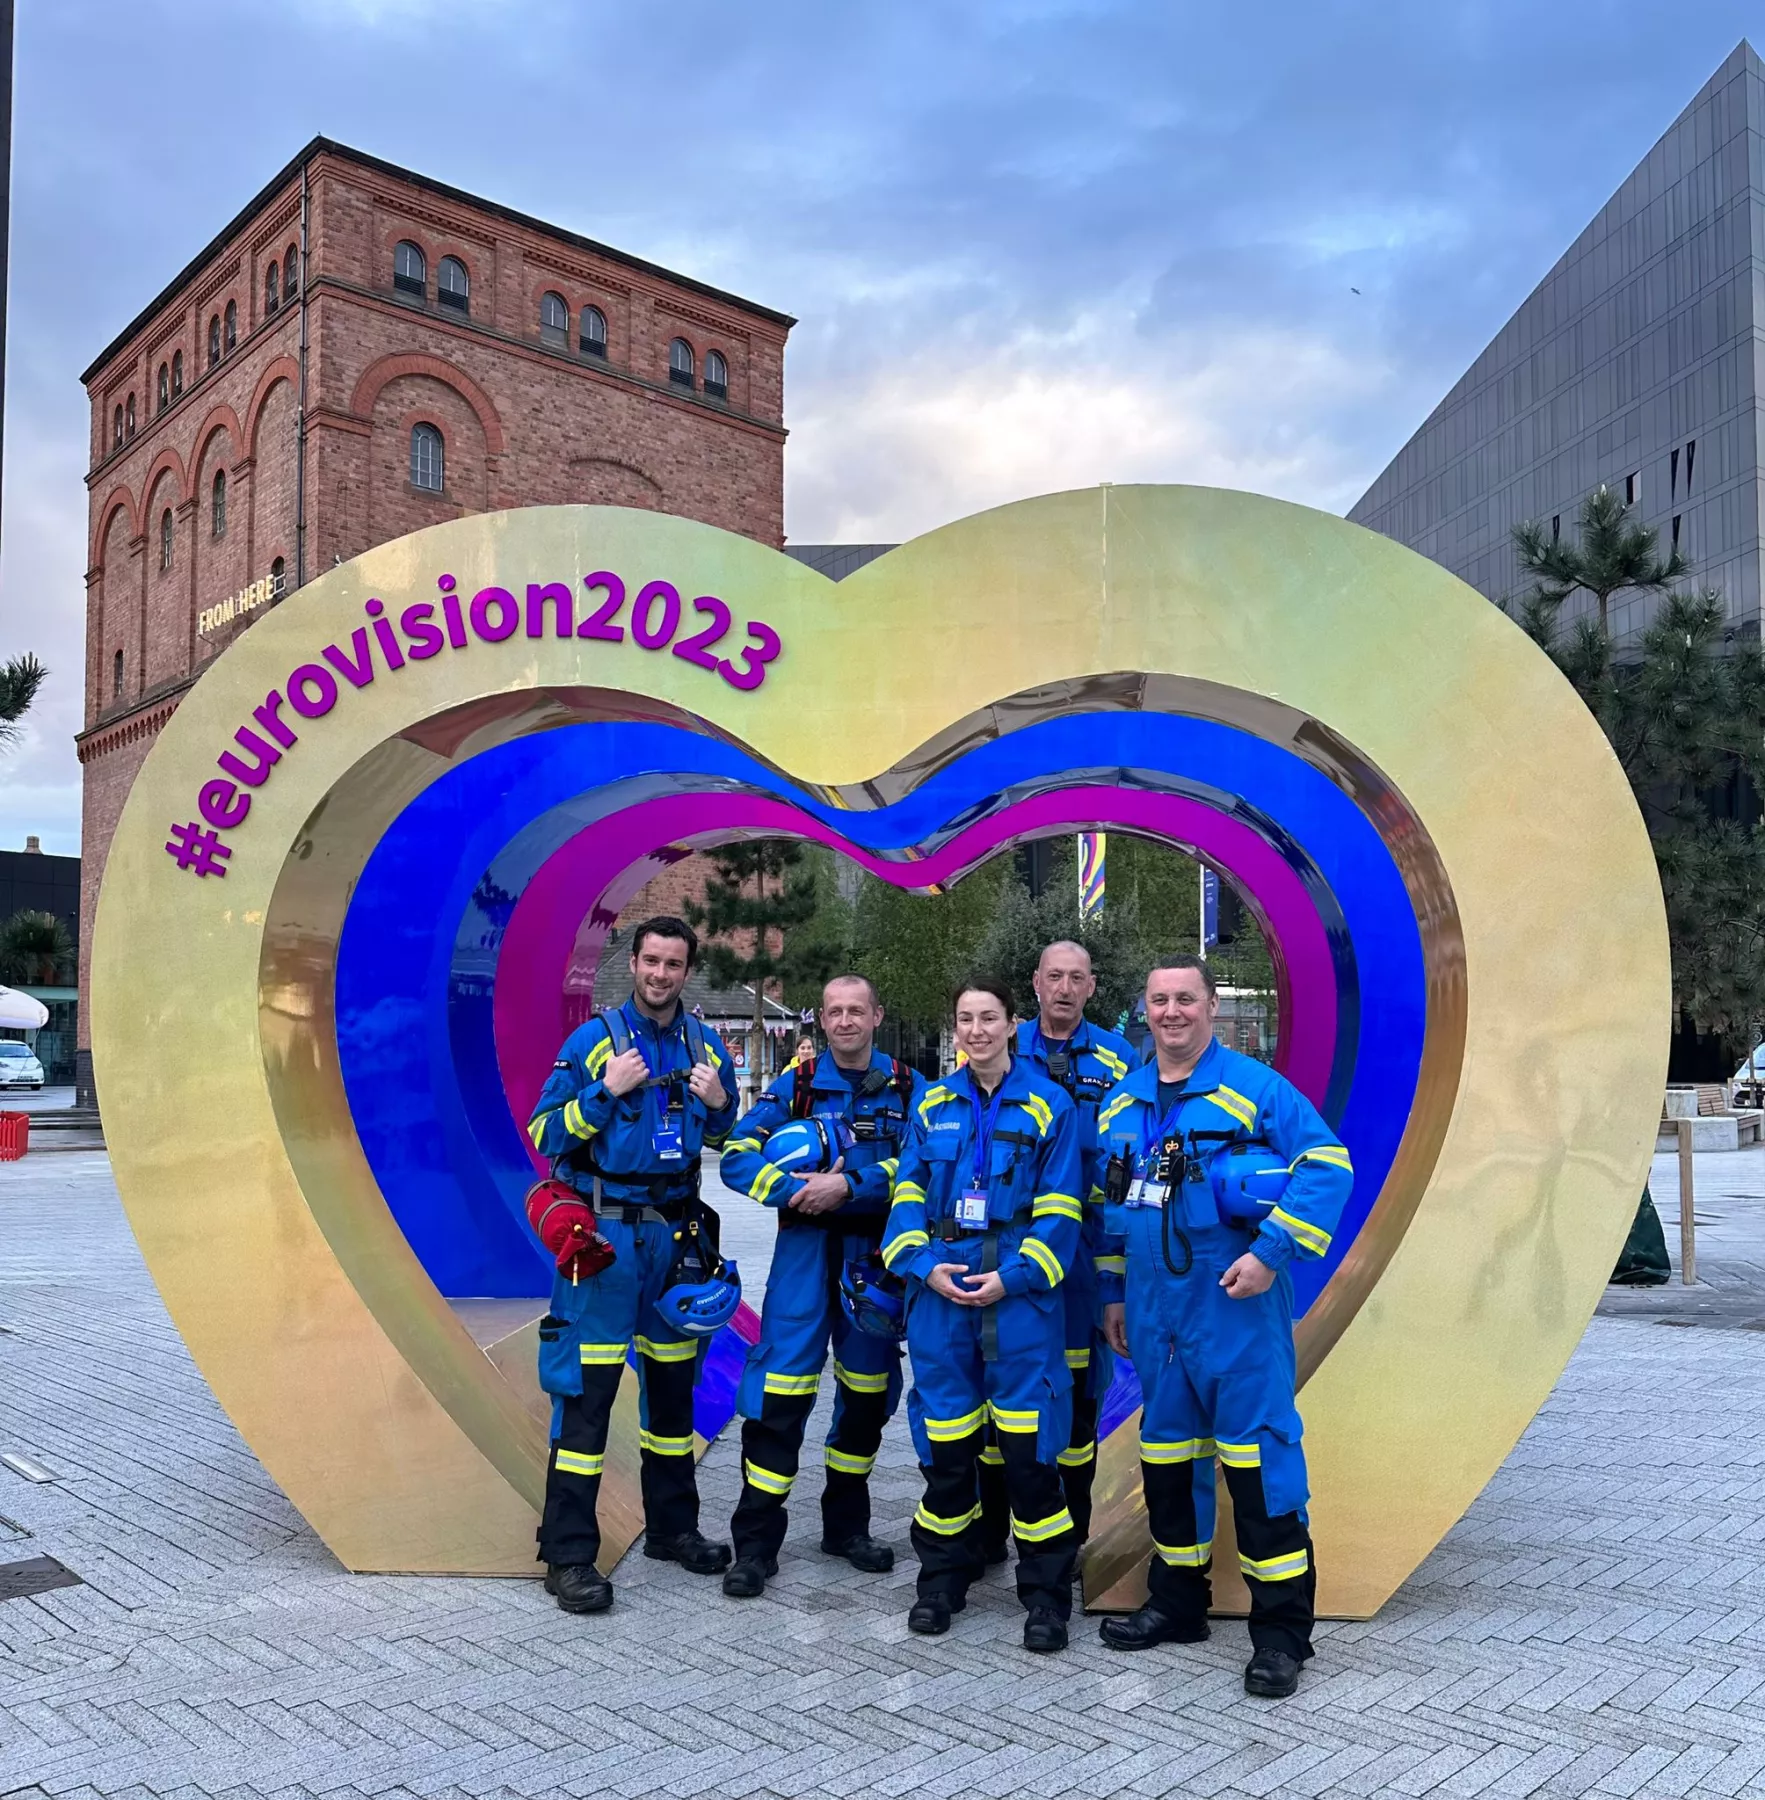 Five coastguards in uniform posing in front of Eurovision stand in Liverpool